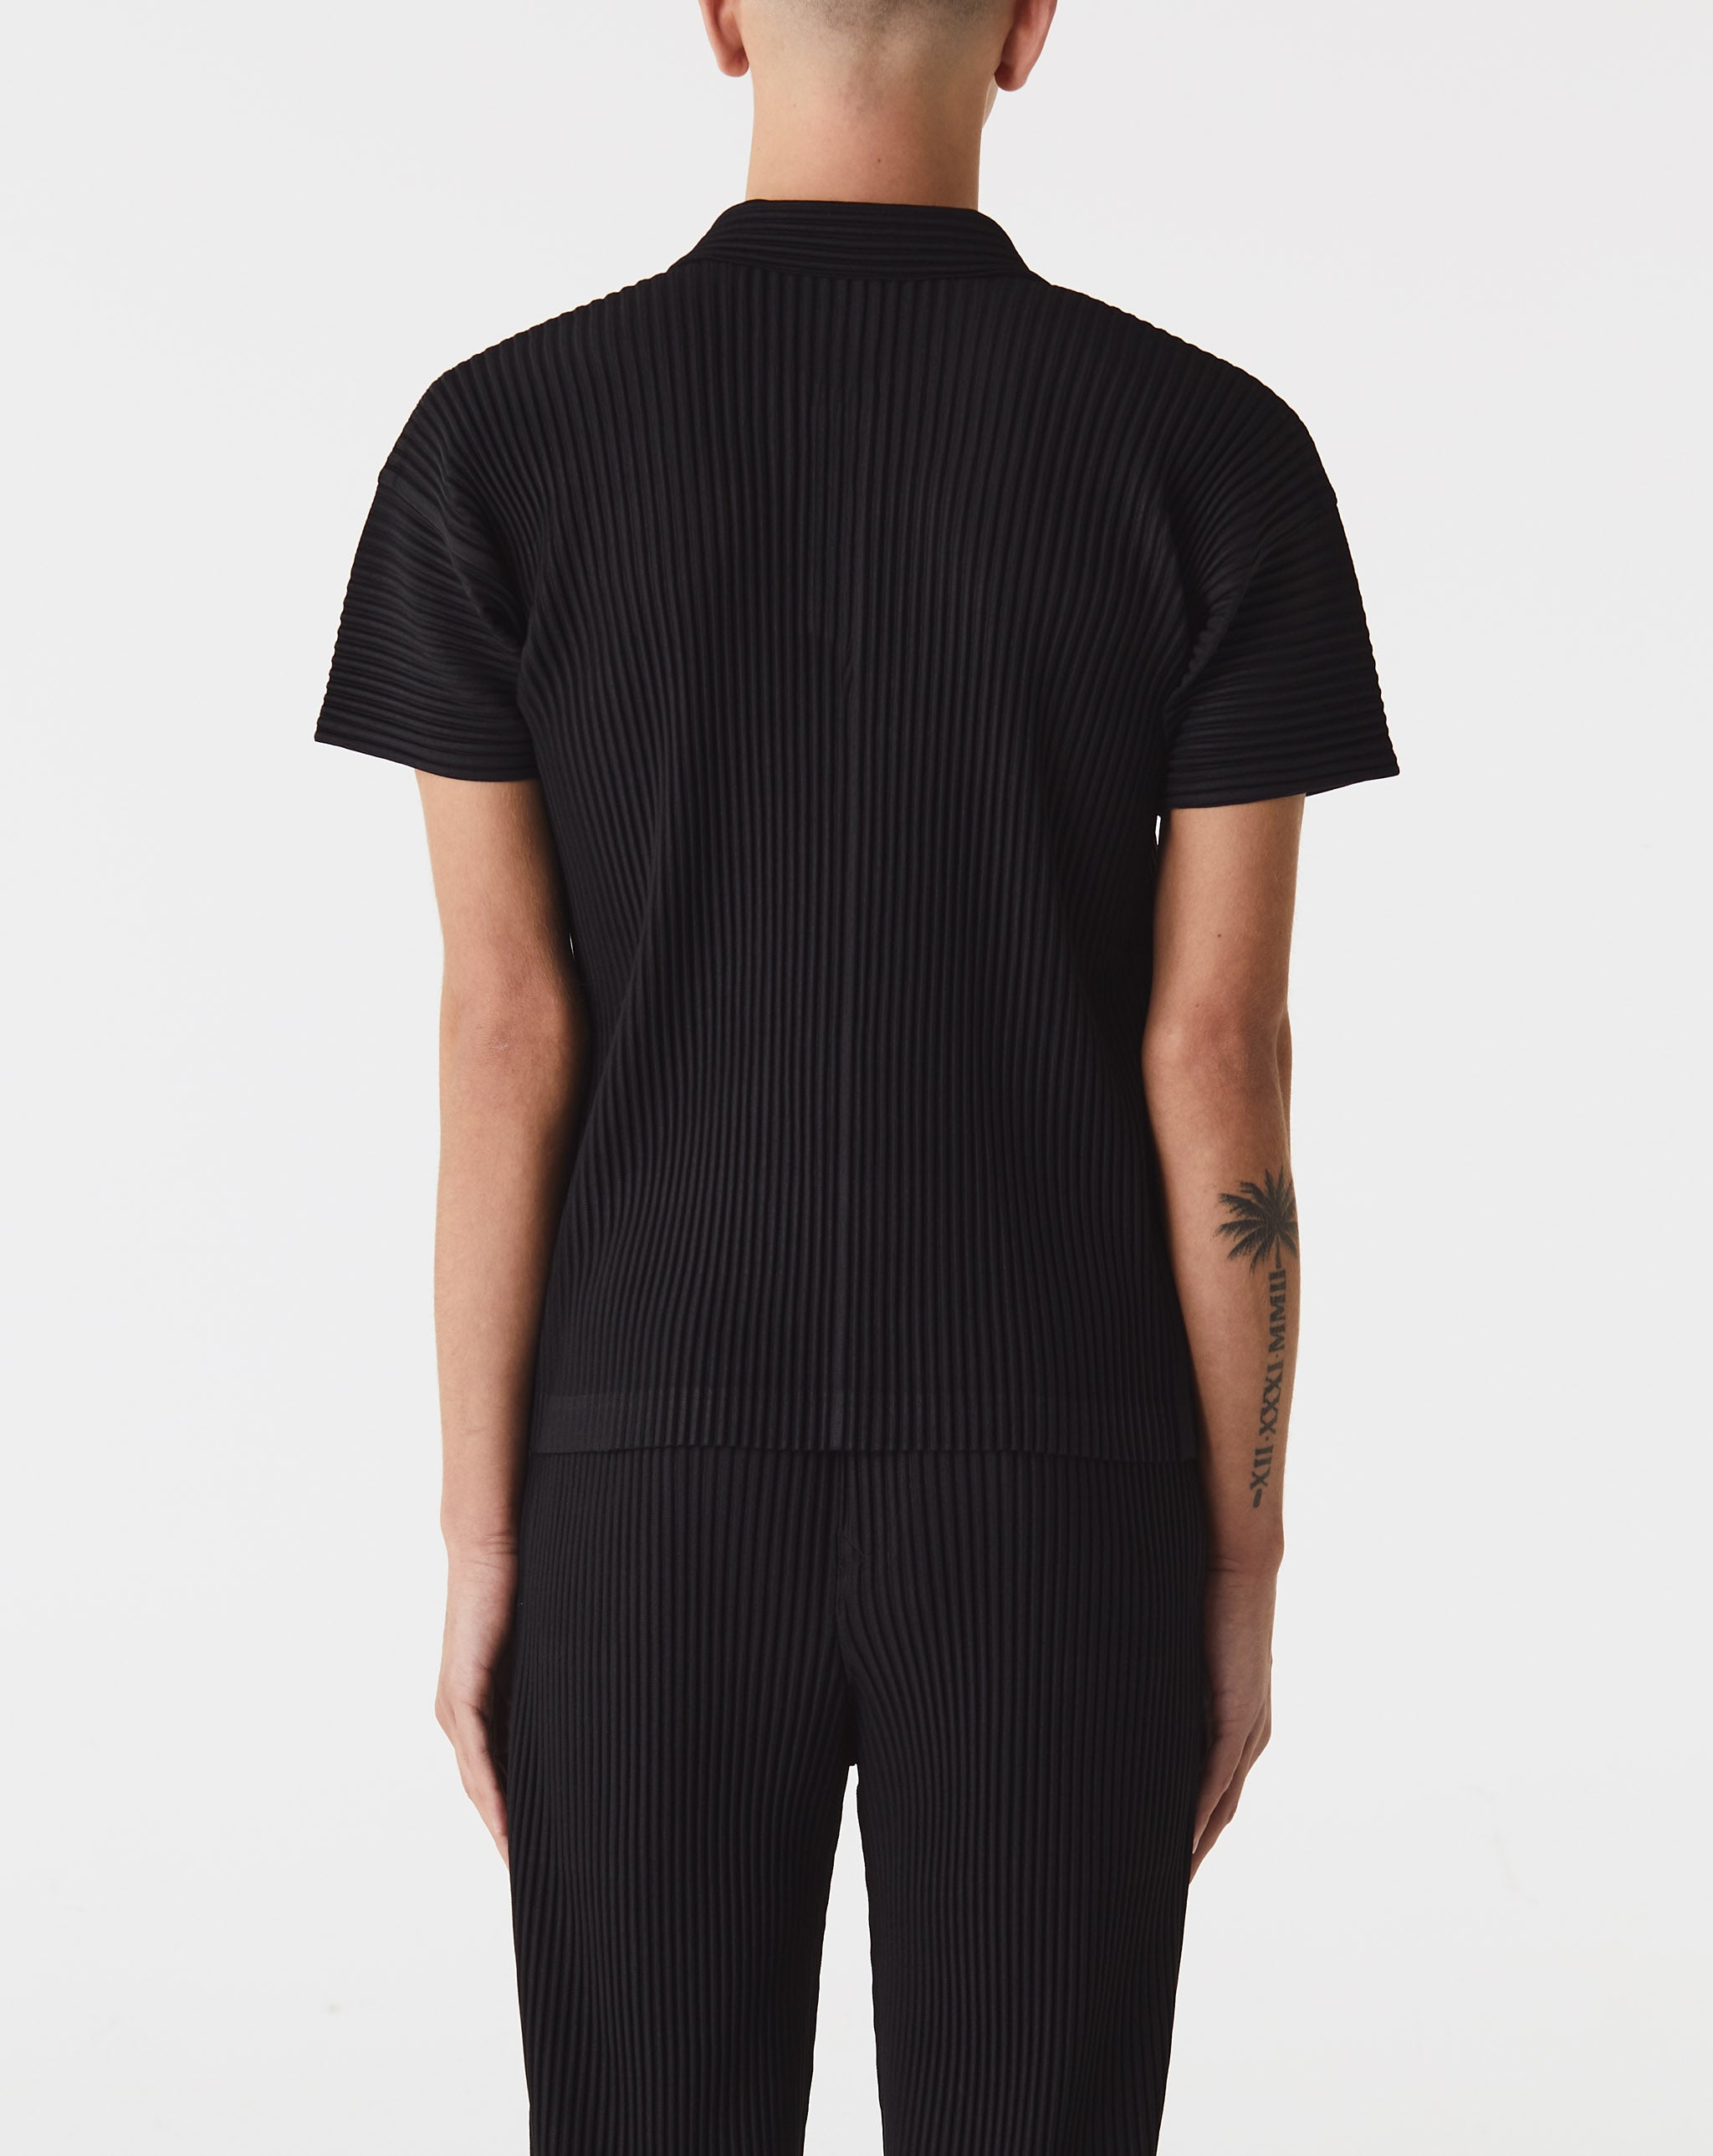 Who Decides War Basic Pleated Polo  - Cheap Atelier-lumieres Jordan outlet